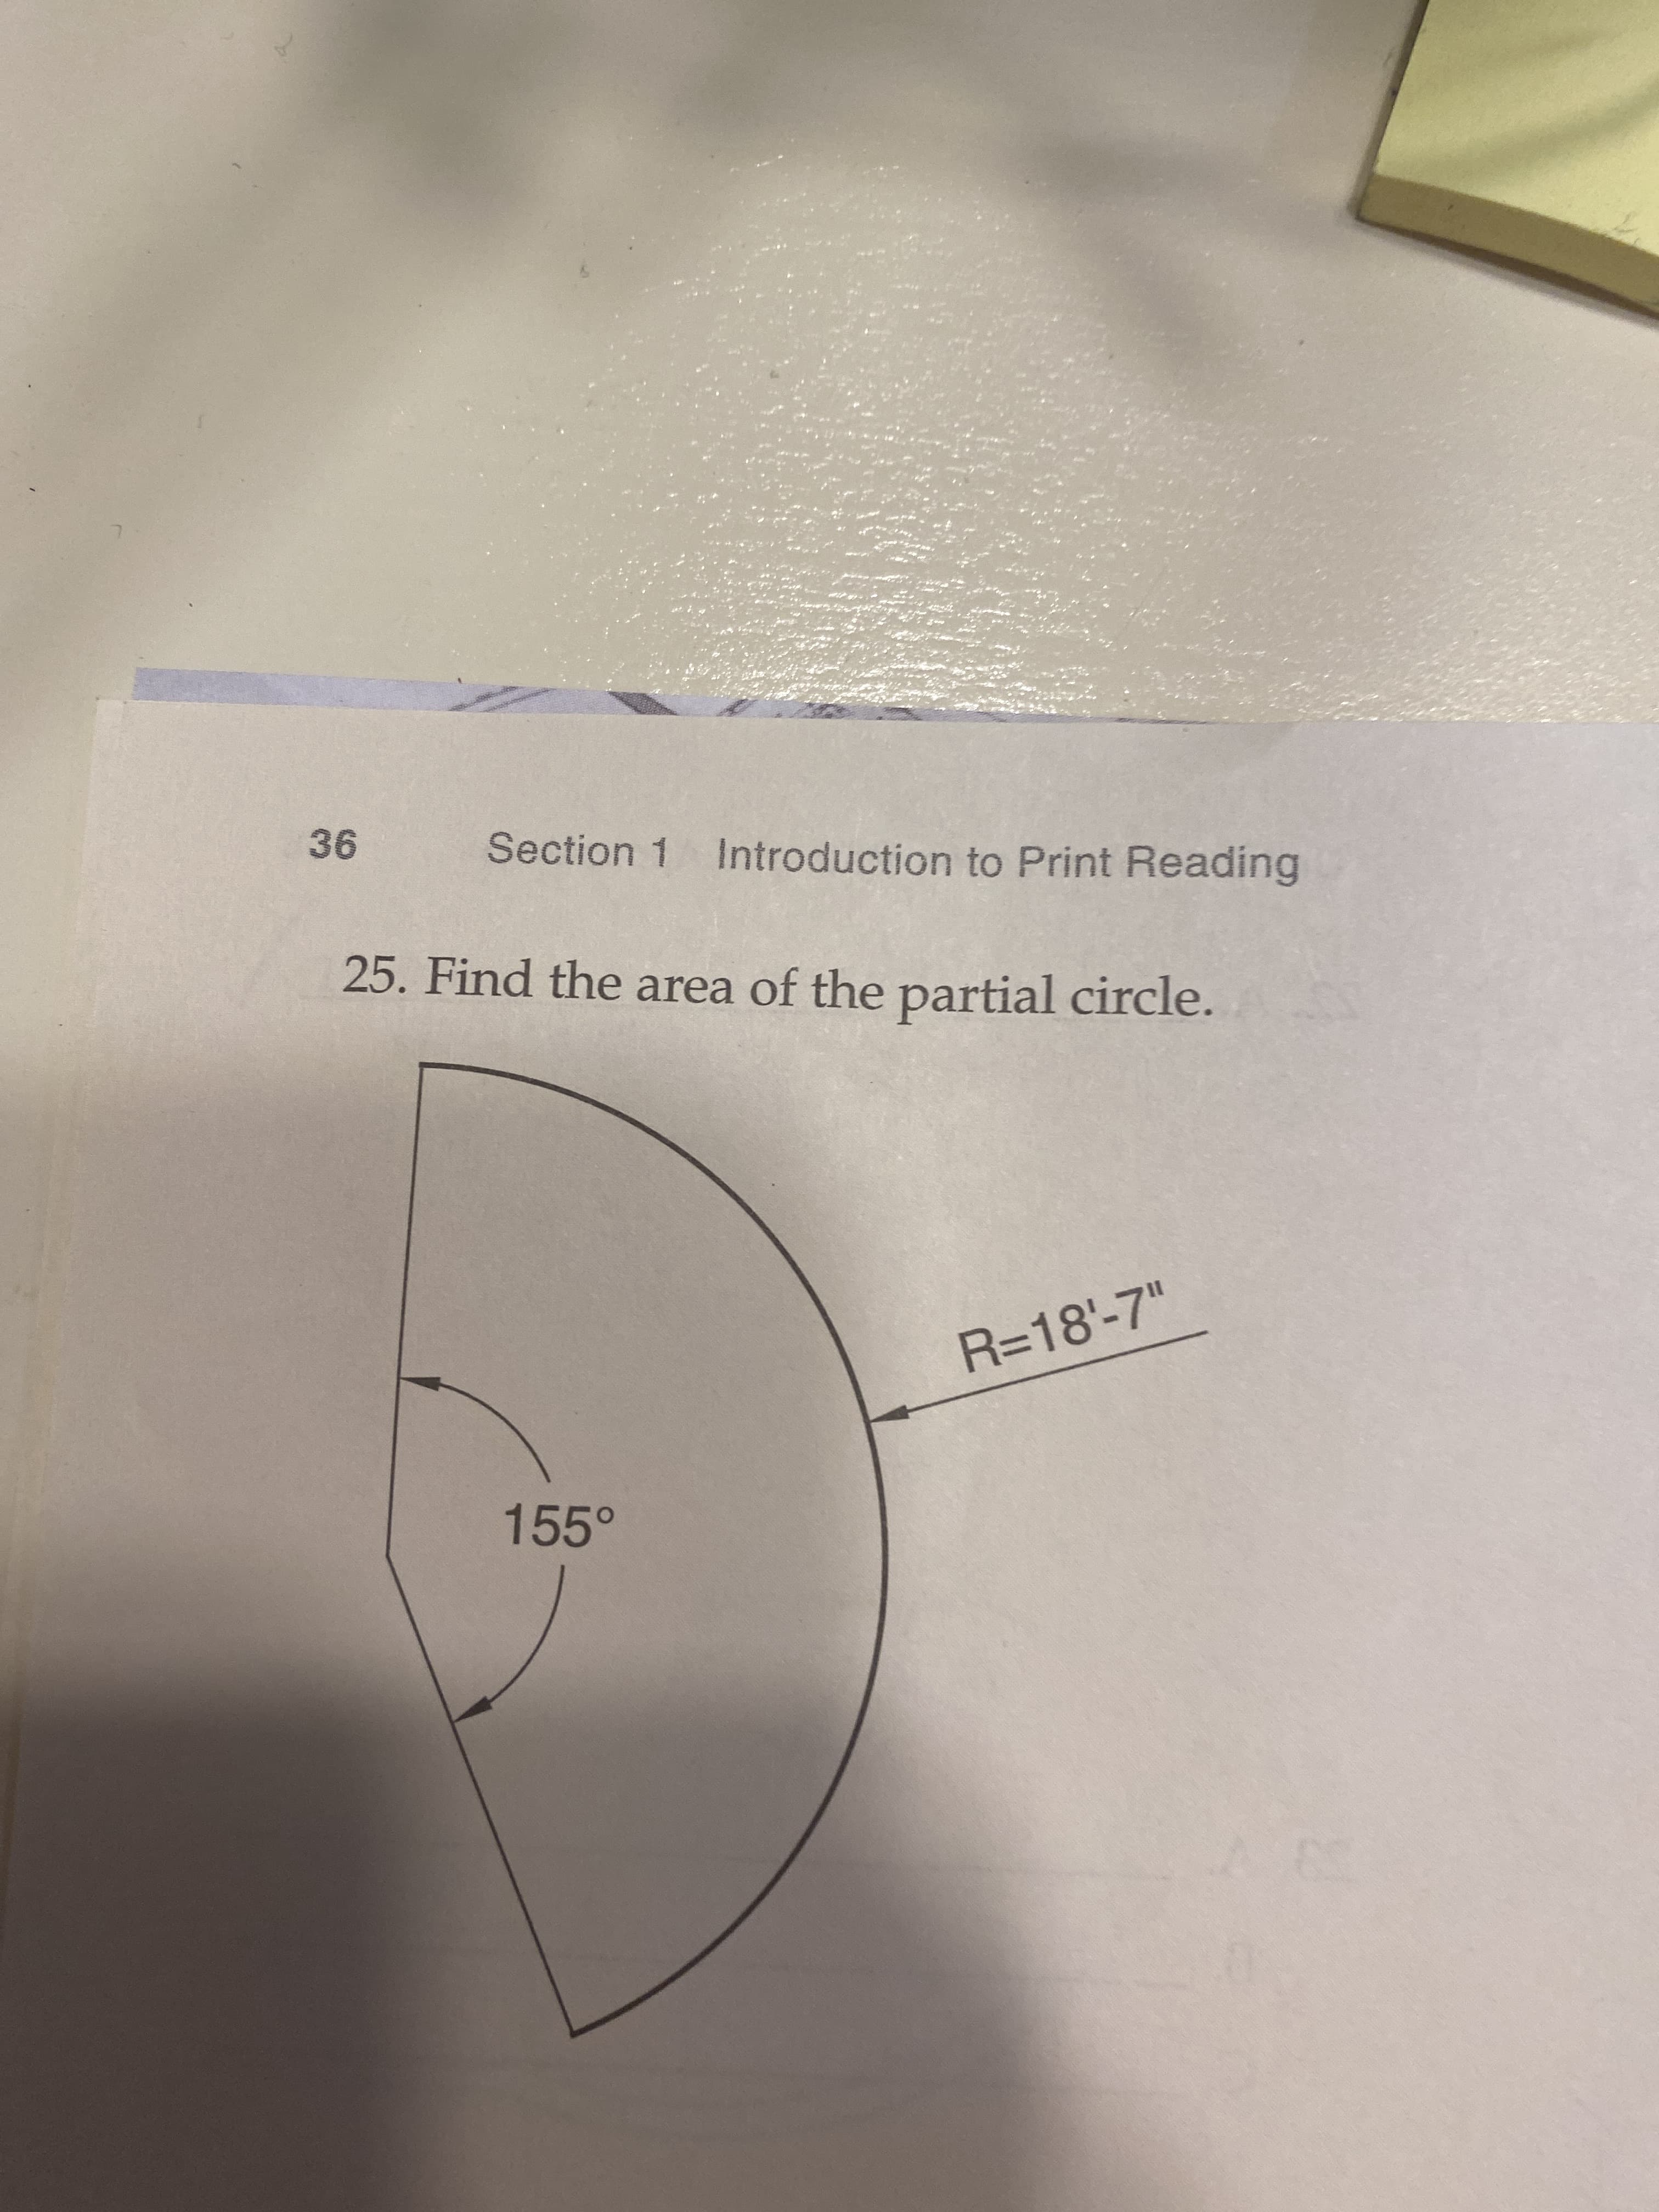 25. Find the area of the partial circle.
R=18'-7"
155°
